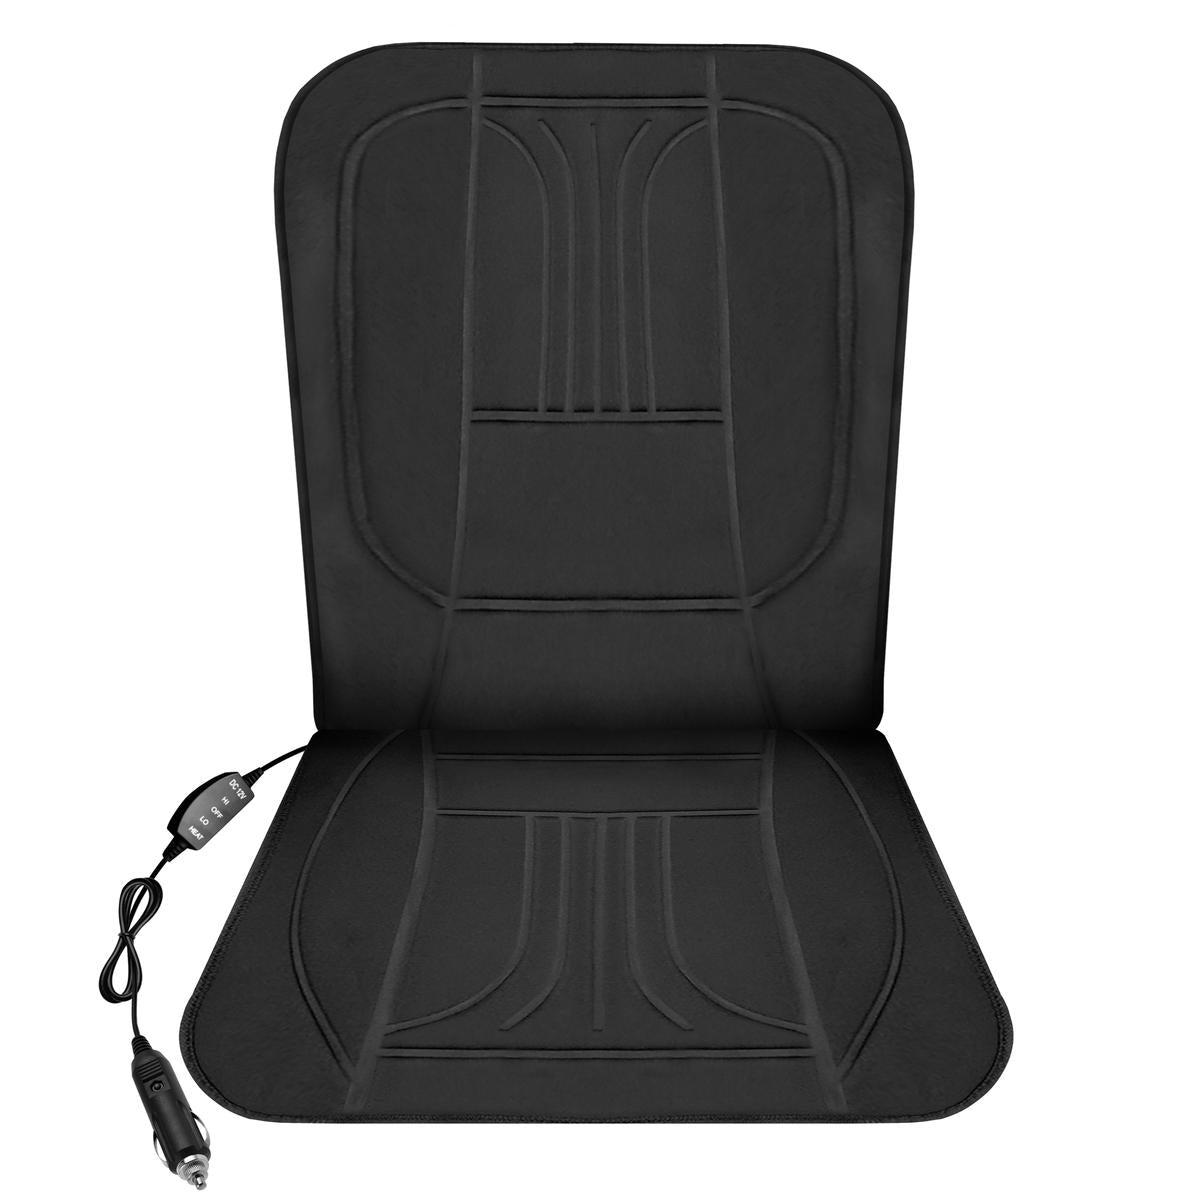  Warm Car Seat Cover Front Plush Rear Pad Cushion Auto Protector  for Winter Soft (Black) : Automotive